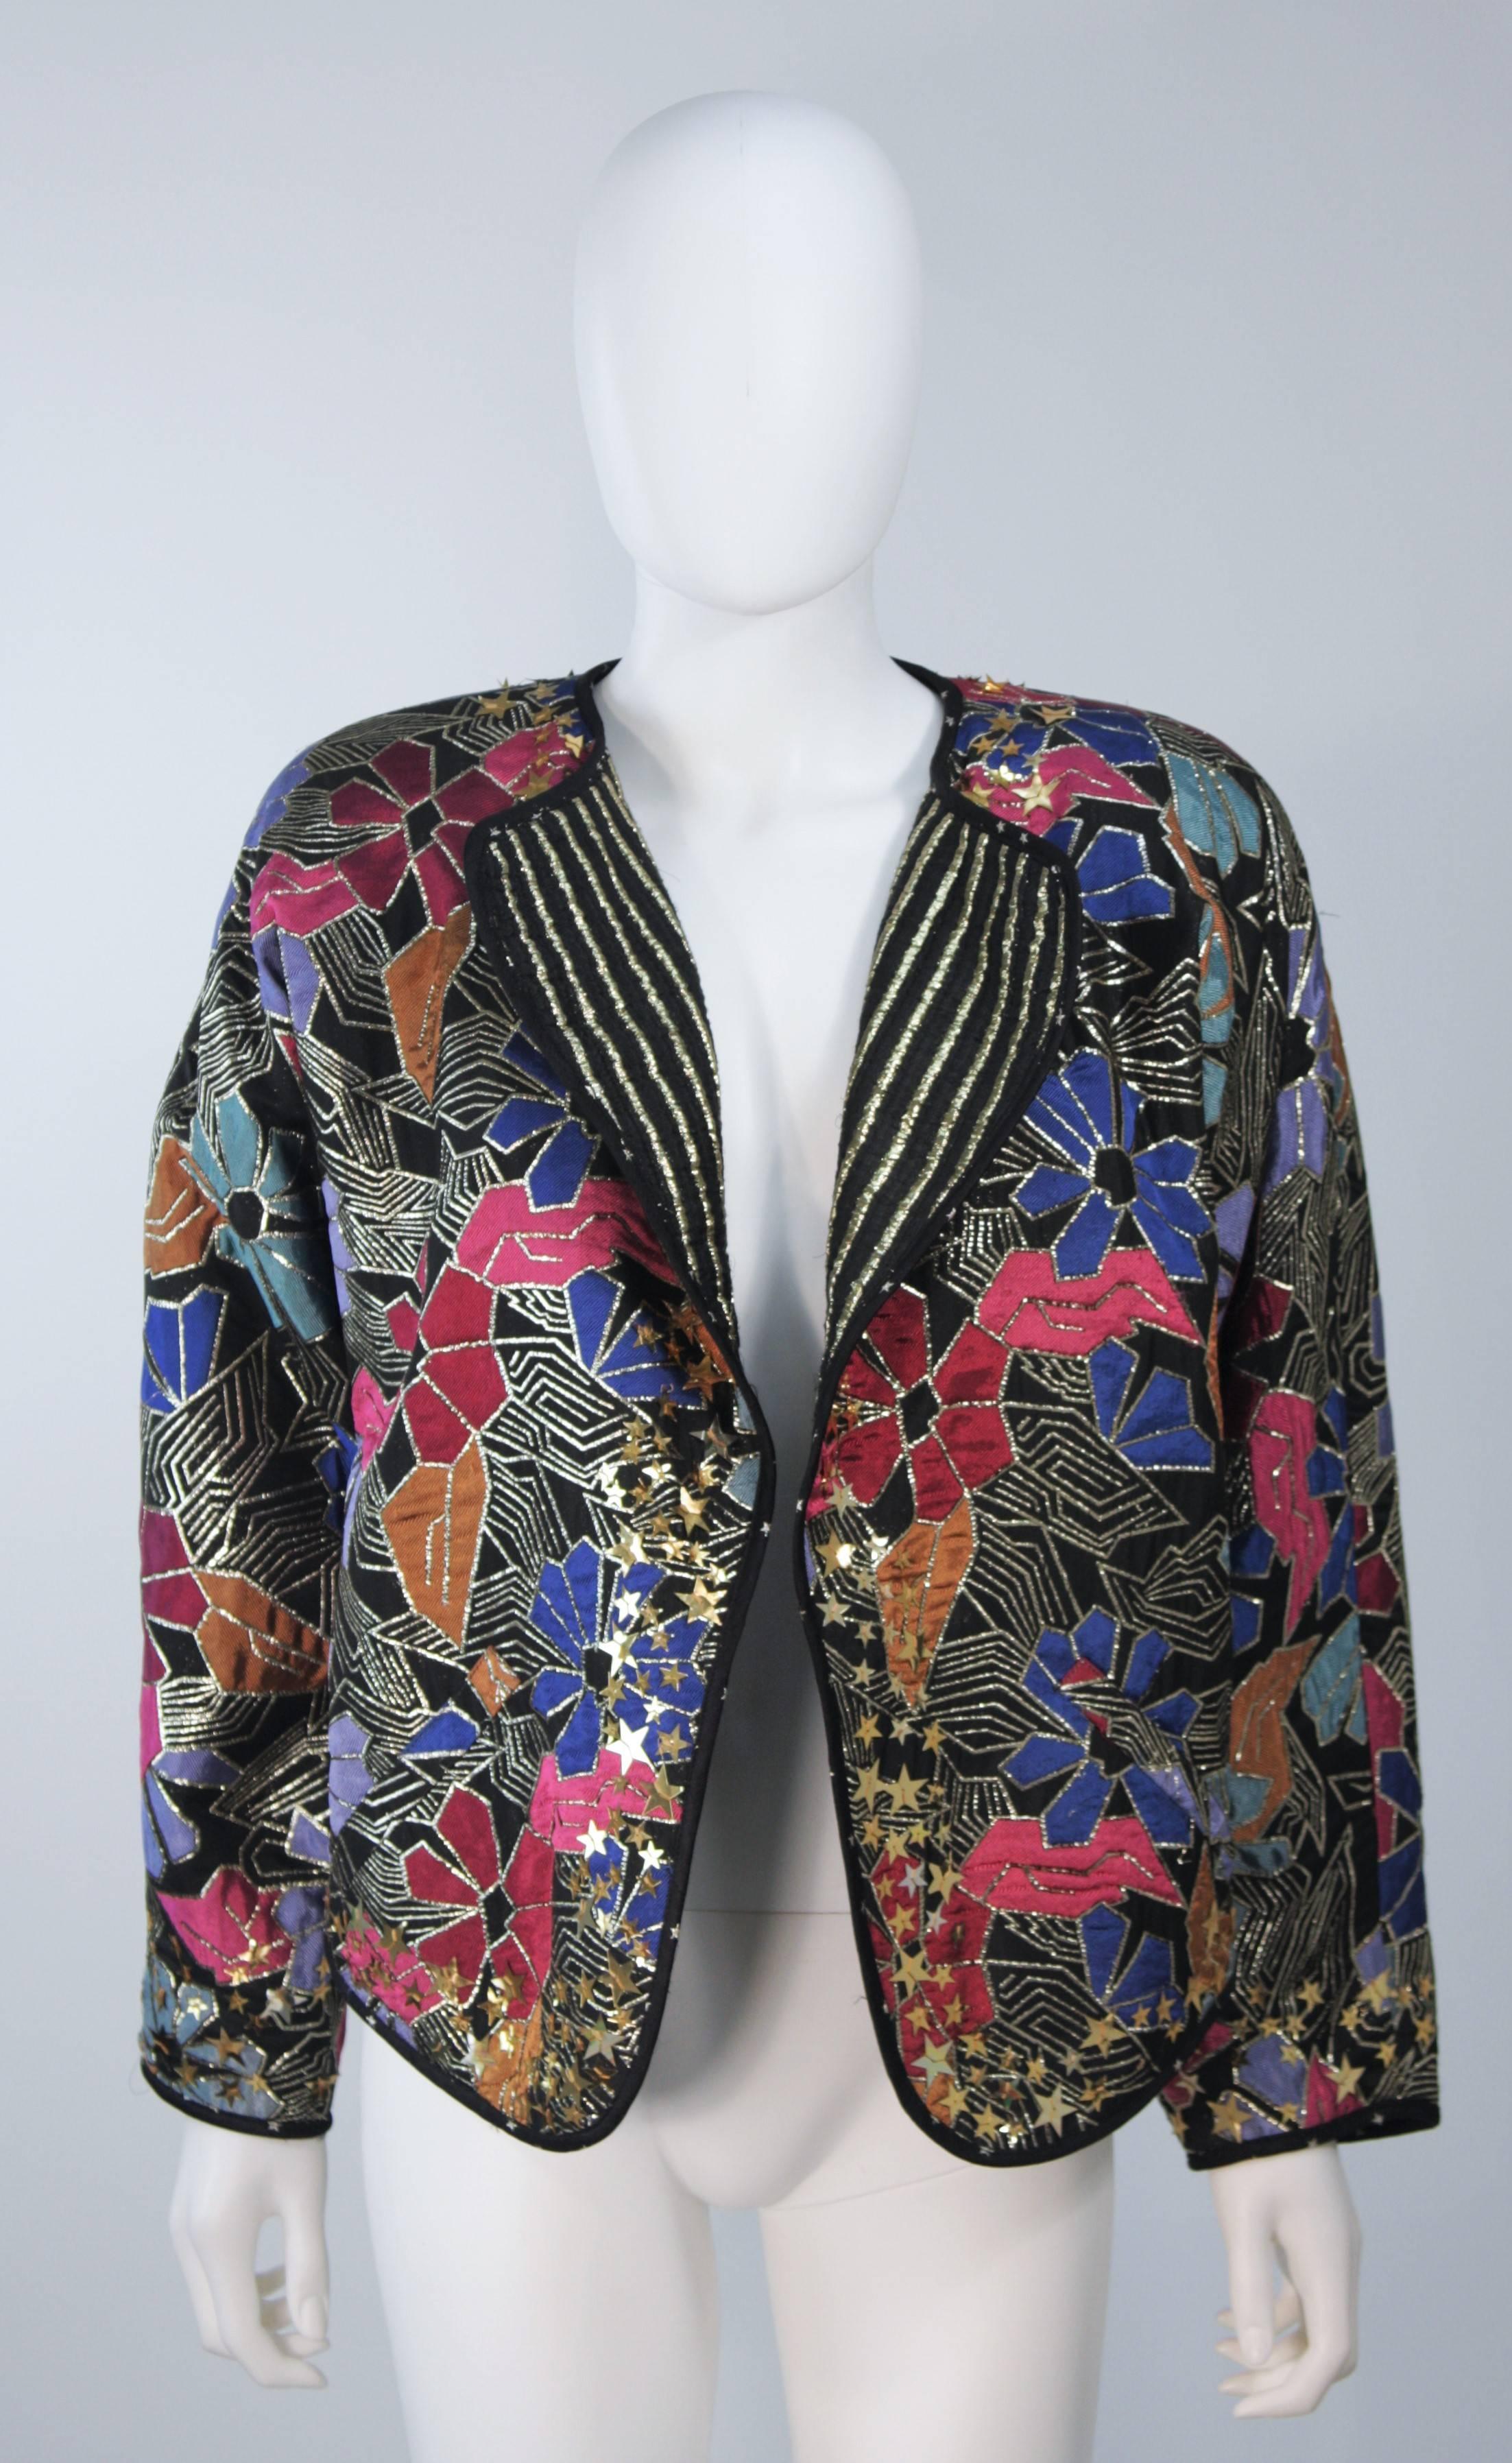 GEOFFREY BEENE COUTURE Reversible Embellished Jacket and Draped Dress Size 6-8 2